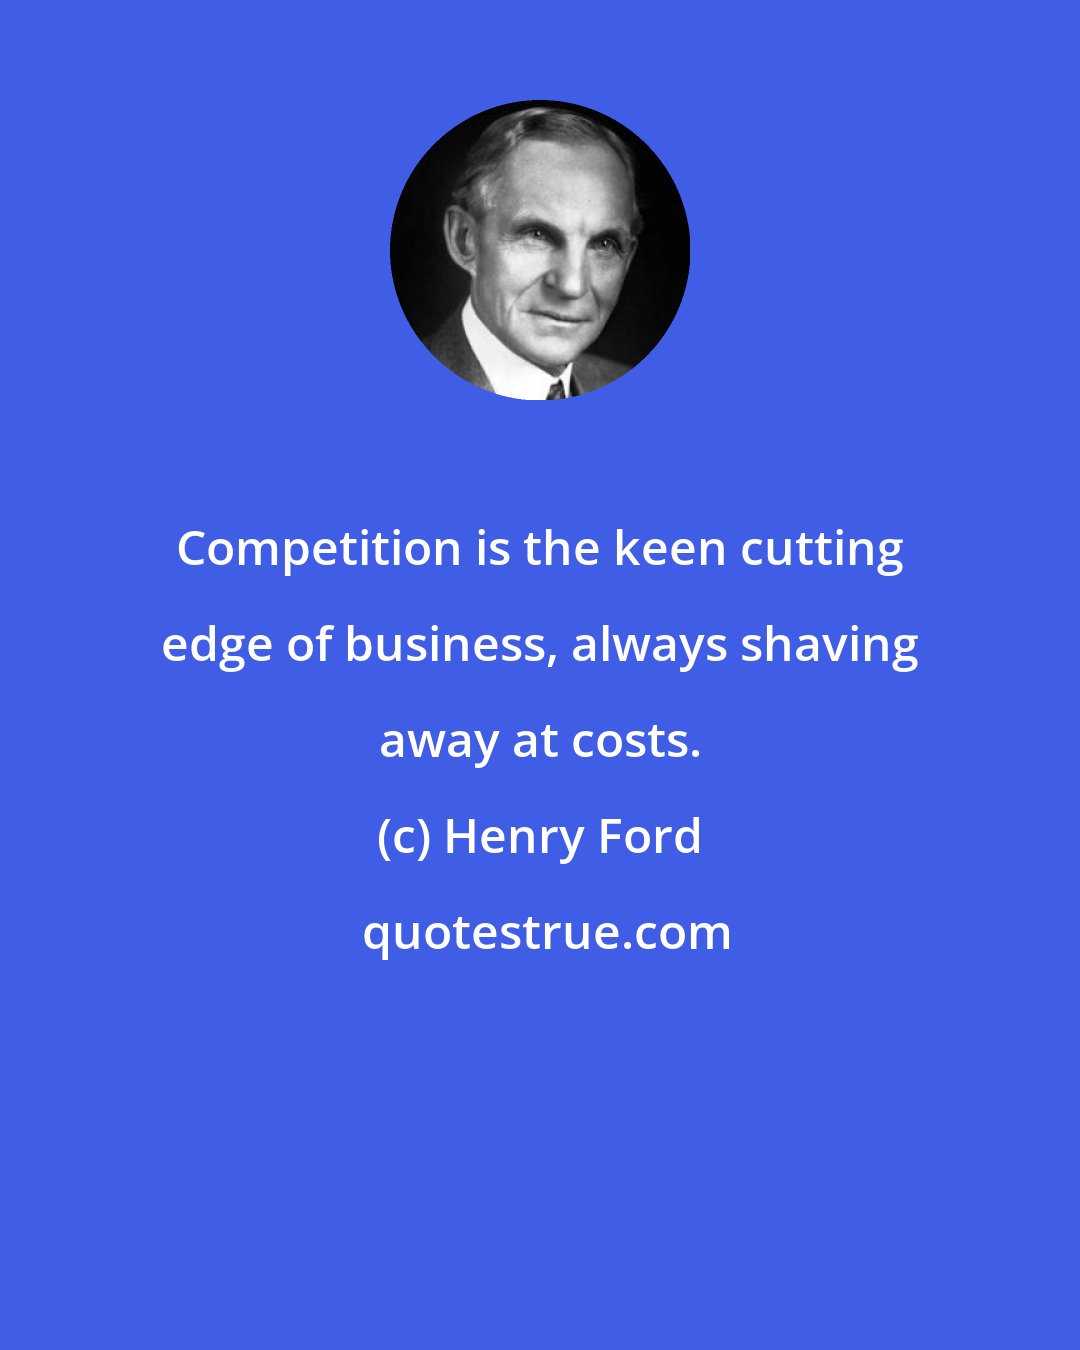 Henry Ford: Competition is the keen cutting edge of business, always shaving away at costs.